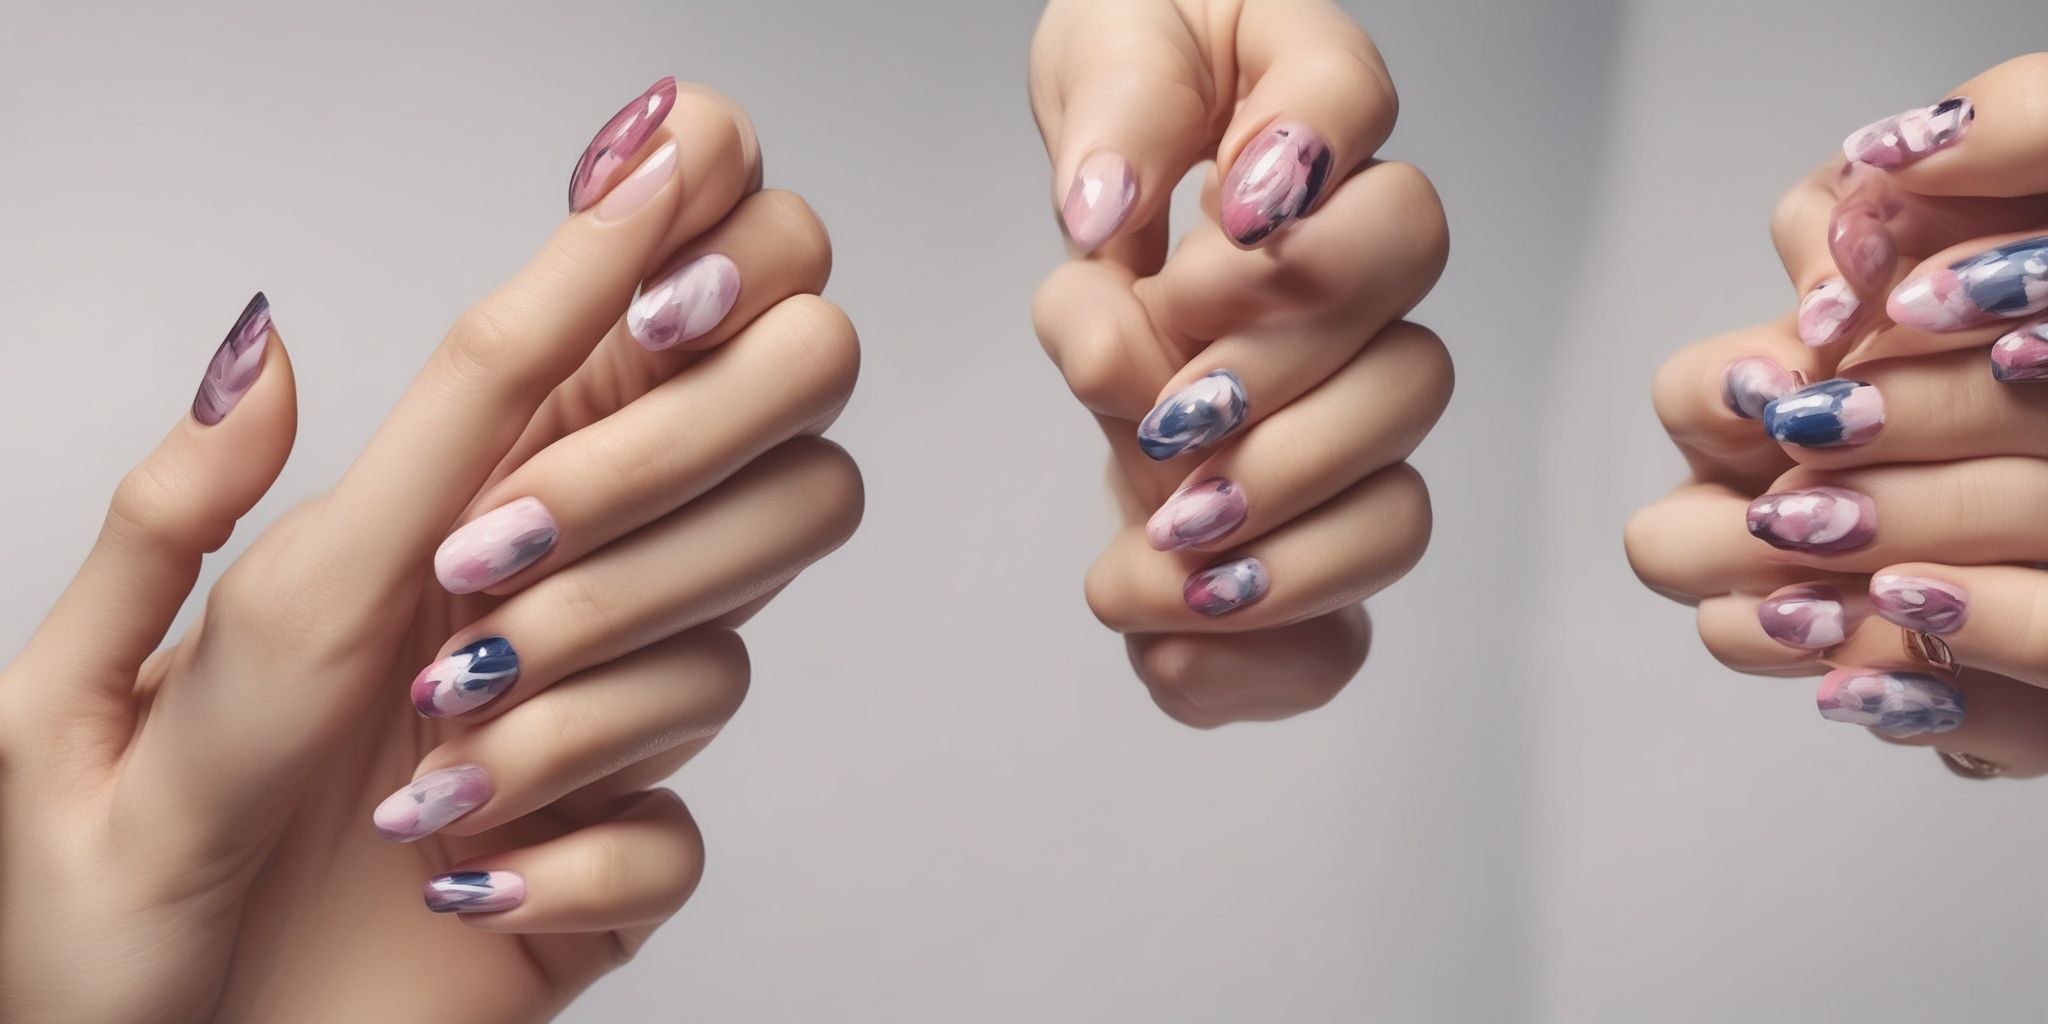 Painted nails  in realistic, photographic style